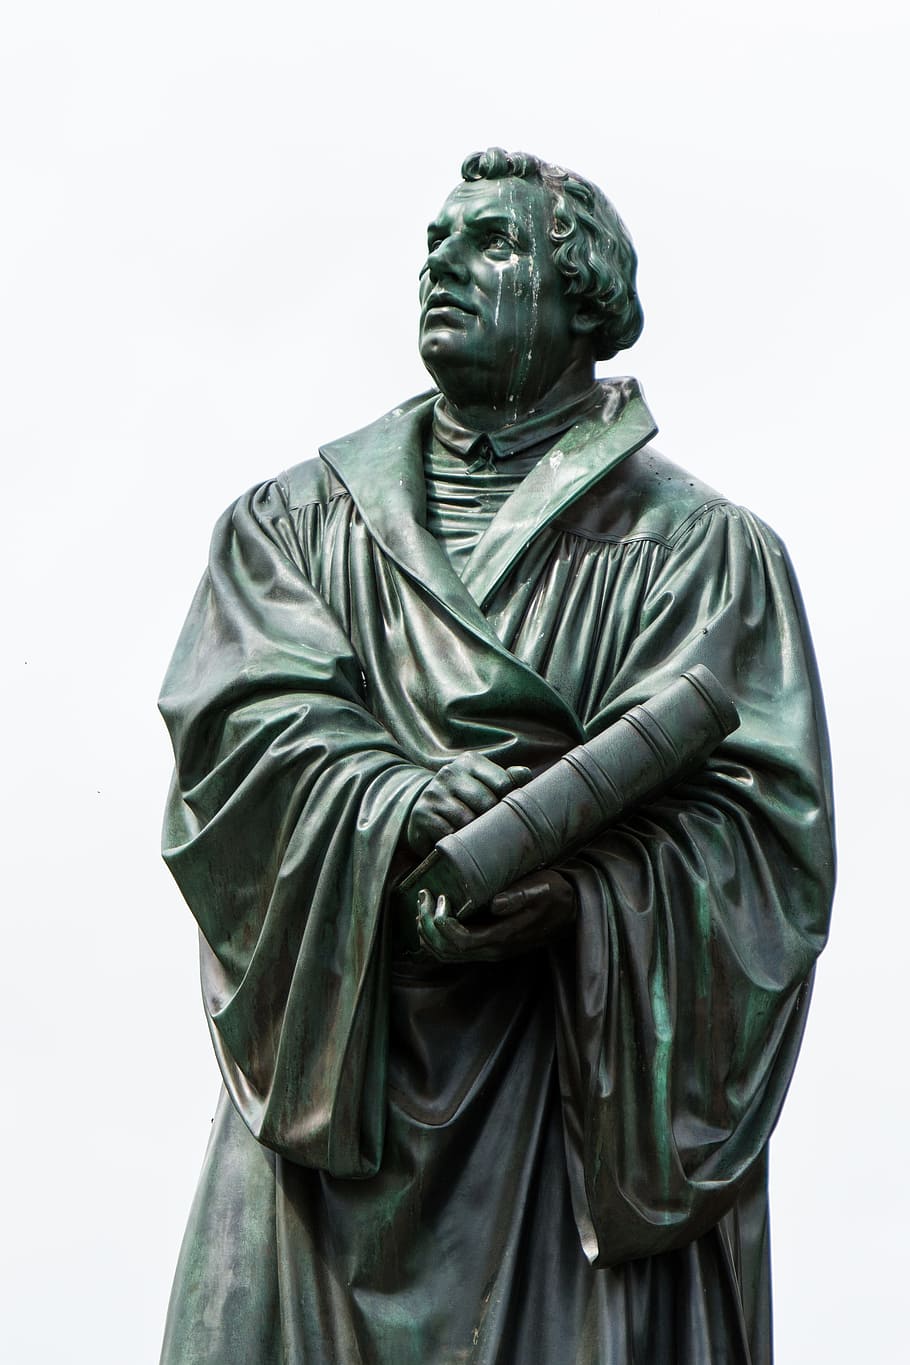 martin luther, luther, reformation, protestant, monument, church, statue, bible, figure, luther year